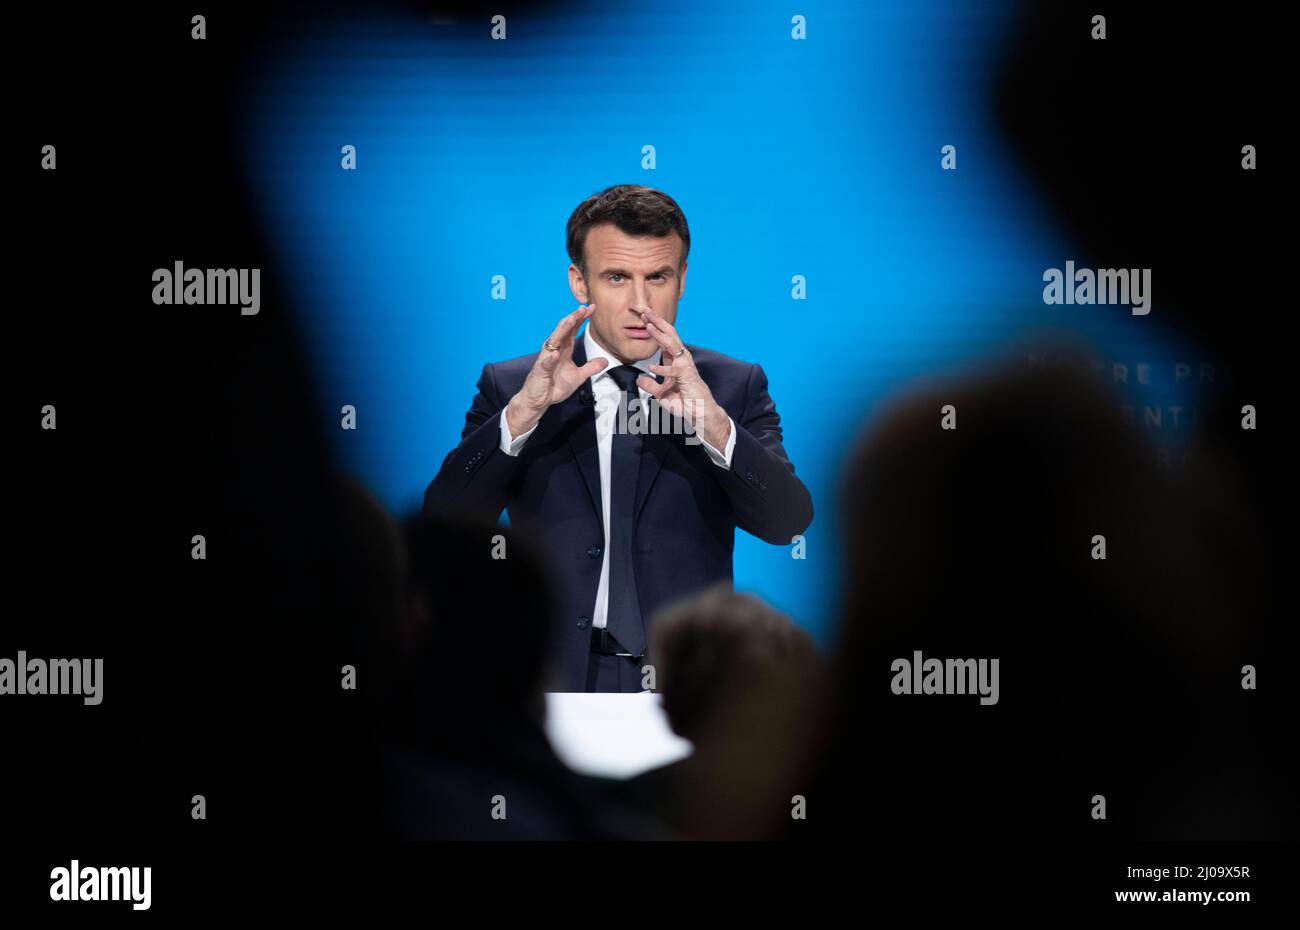 Aubervilliers, France. 17th Mar, 2022. French President Emmanuel Macron speaks during a press conference in Aubervilliers, Seine Saint Denis, France, on March 17, 2022. Macron presented on Thursday his program for the presidential elections to be held in April. At a press conference, Macron laid out his reform plans that cover a broad range of sectors: the economy, culture, agriculture, defense, education, the workplace, gender equality, welfare, households, seniors and the country's institutions. Credit: Xinhua/Alamy Live News Stock Photo